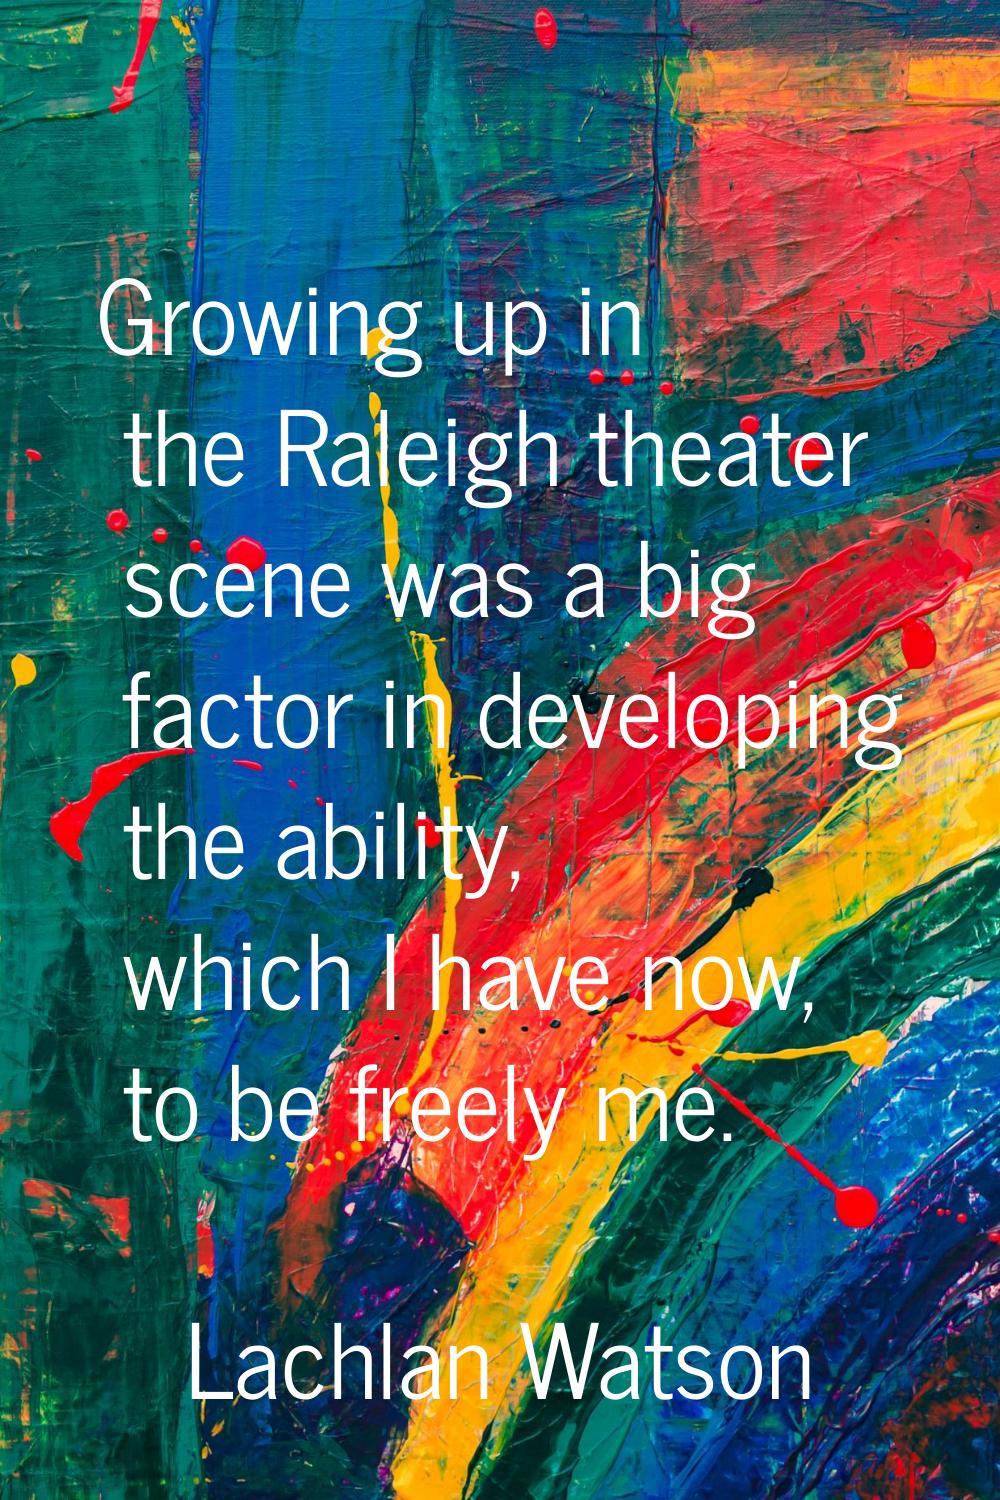 Growing up in the Raleigh theater scene was a big factor in developing the ability, which I have no